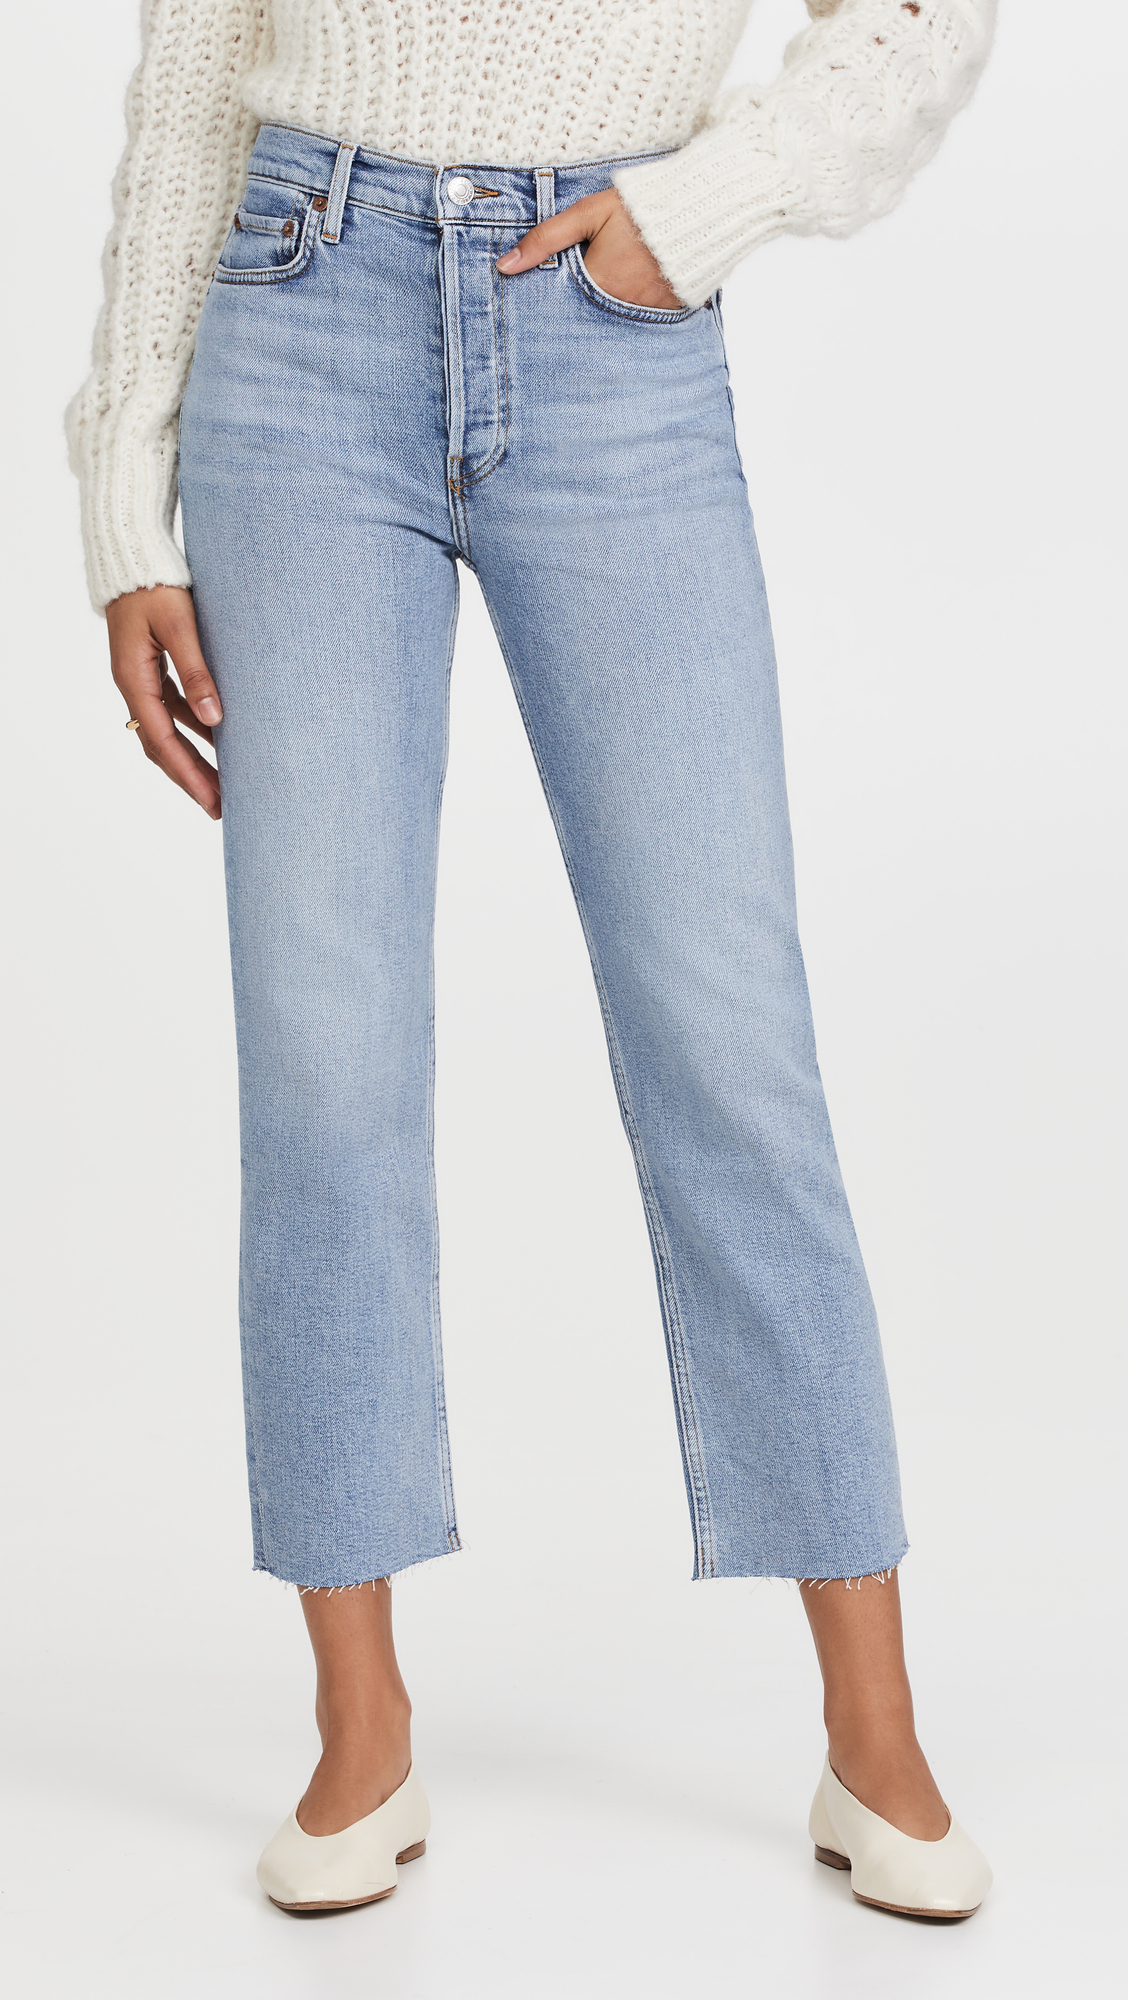 15 Pairs of Jeans We're Splurging On vs. 15 We're Saving On | Who 